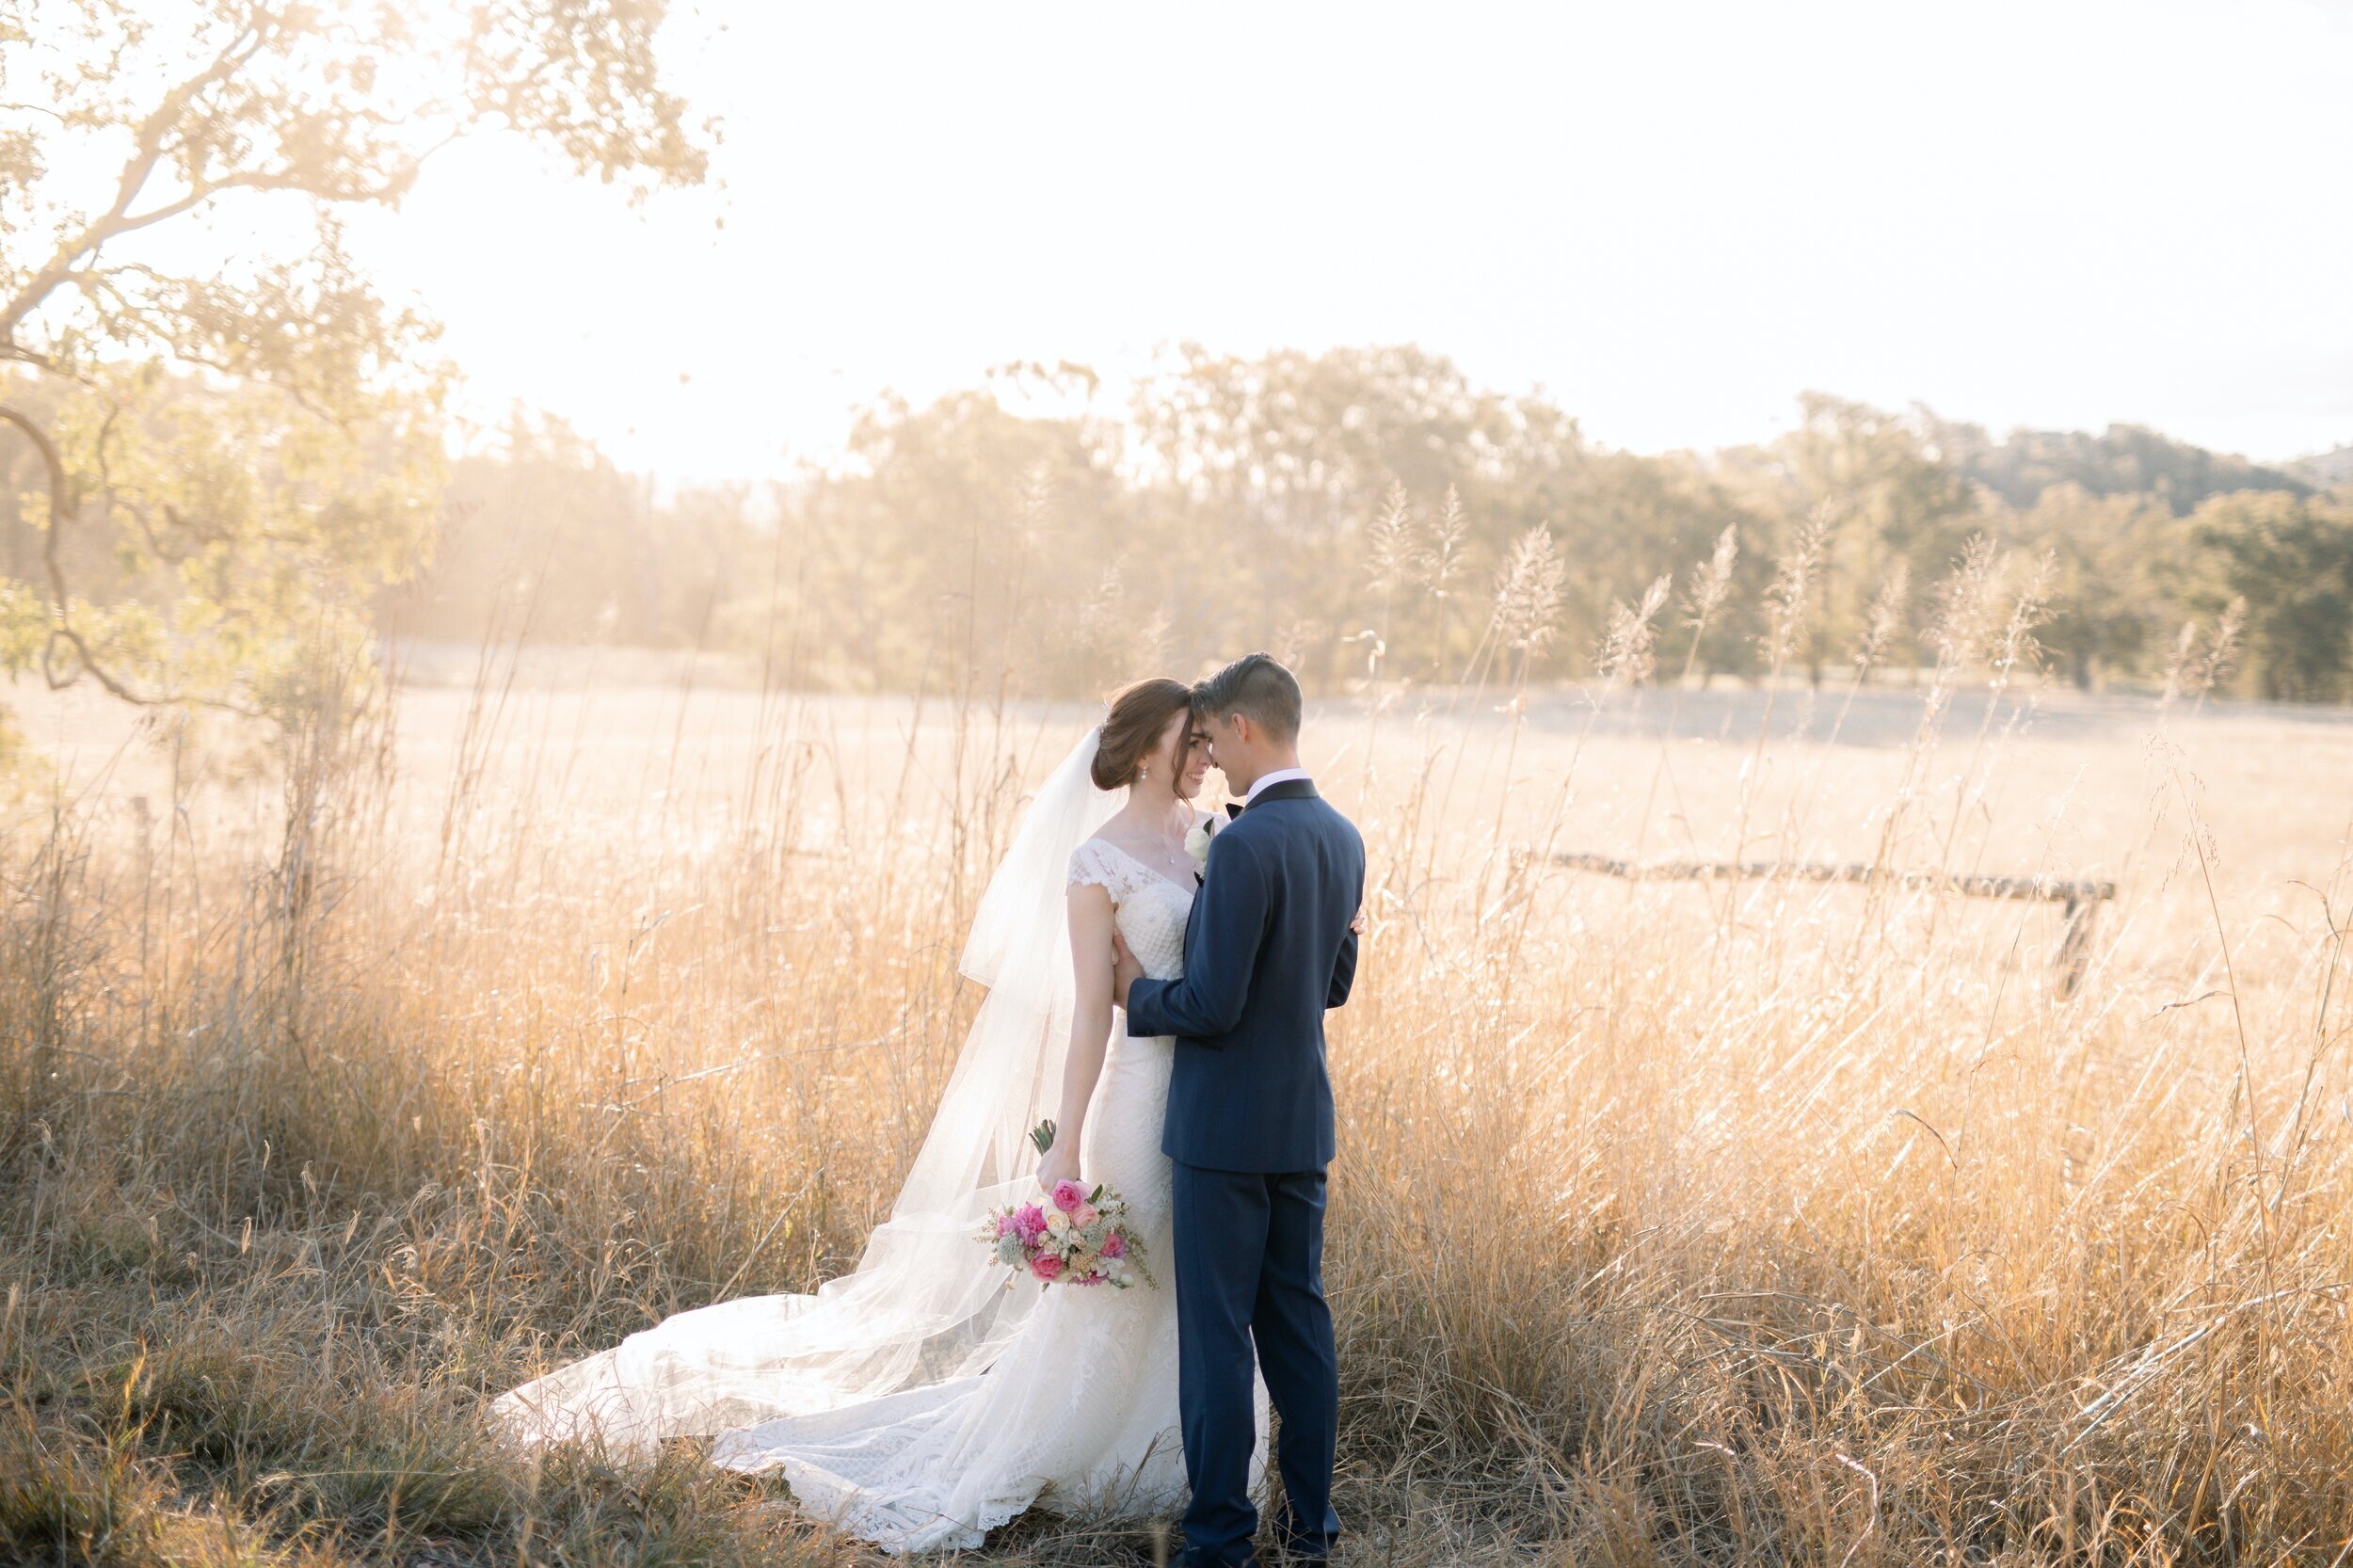 Groom holding his Bride close near an open field